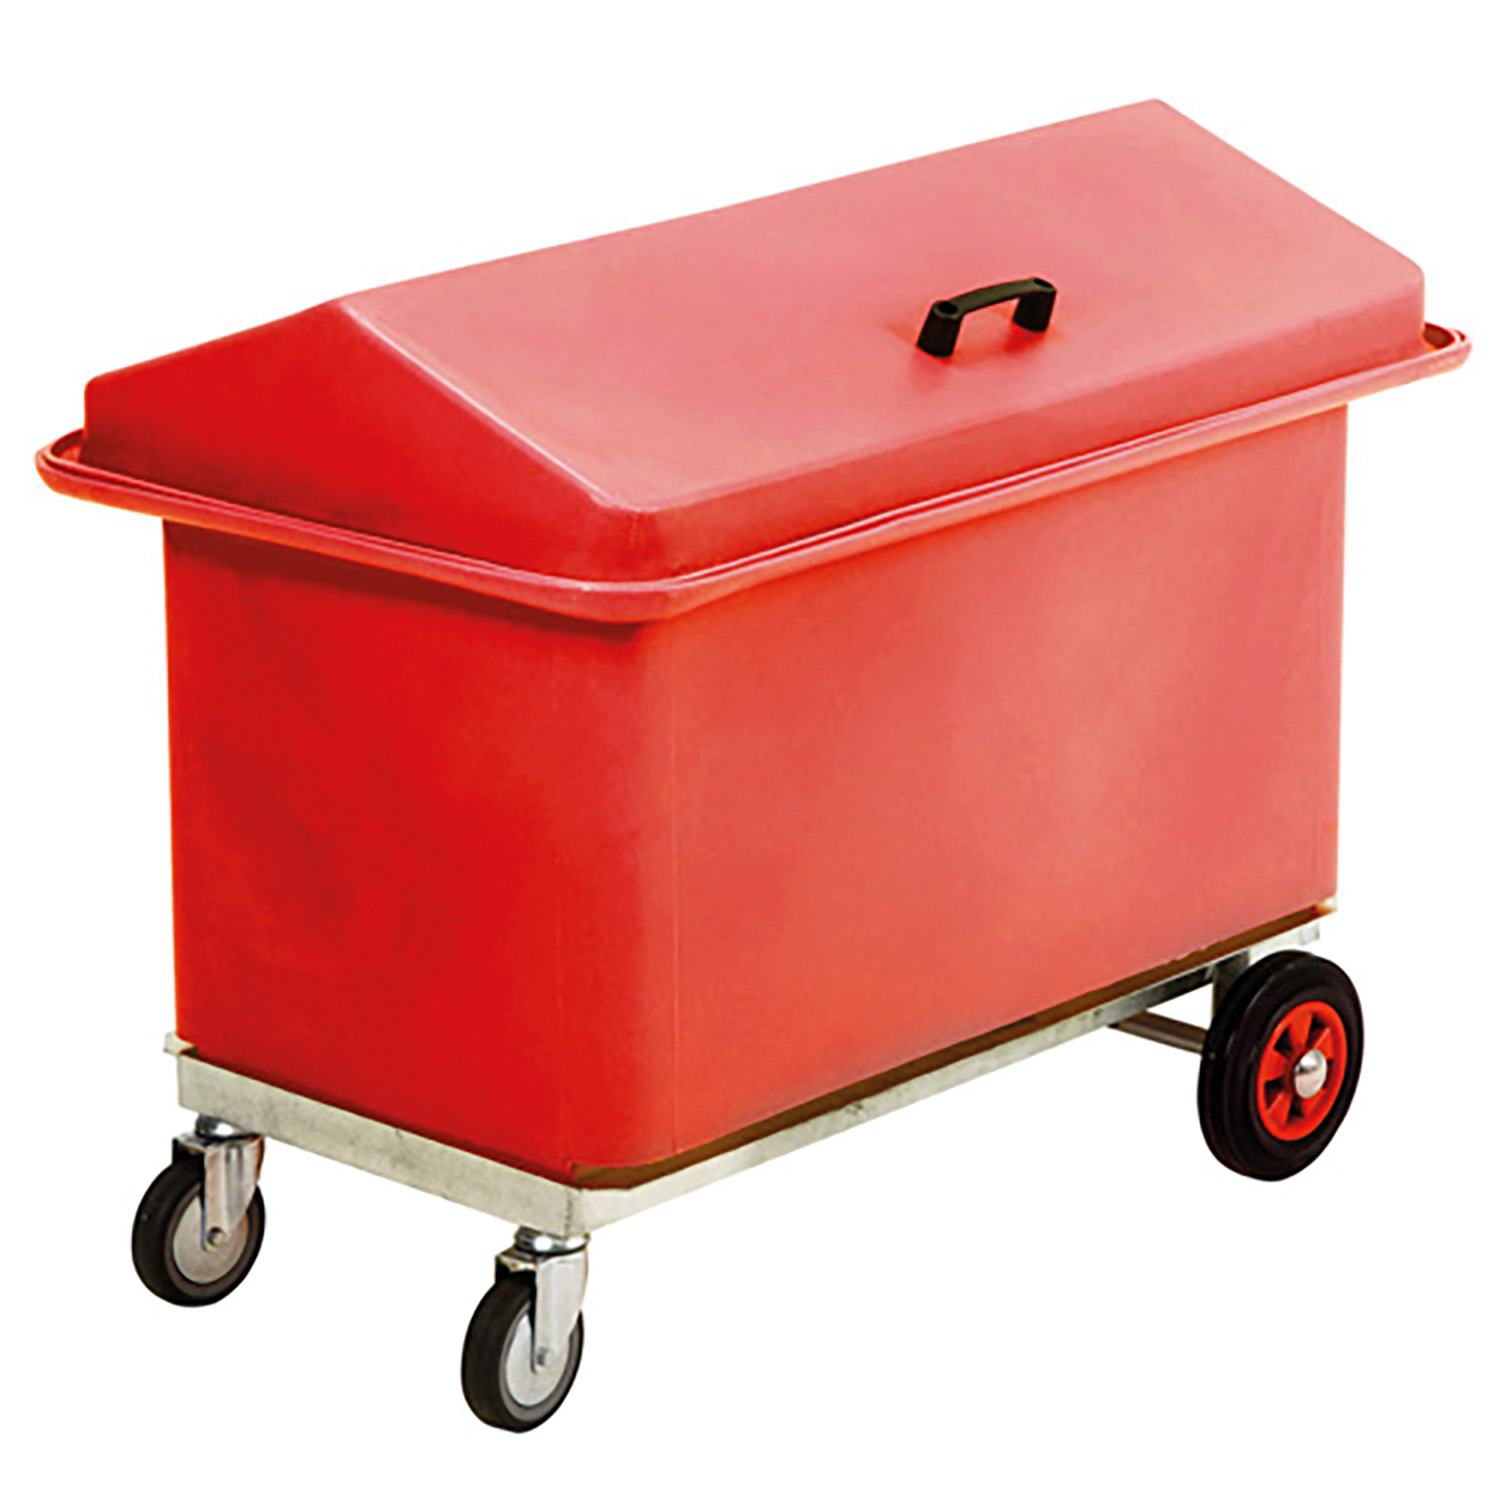 STUBBS MOBILE CHEST ONE COMPARTMENT S58315 RED ONE COMPARTMENT MOBILE